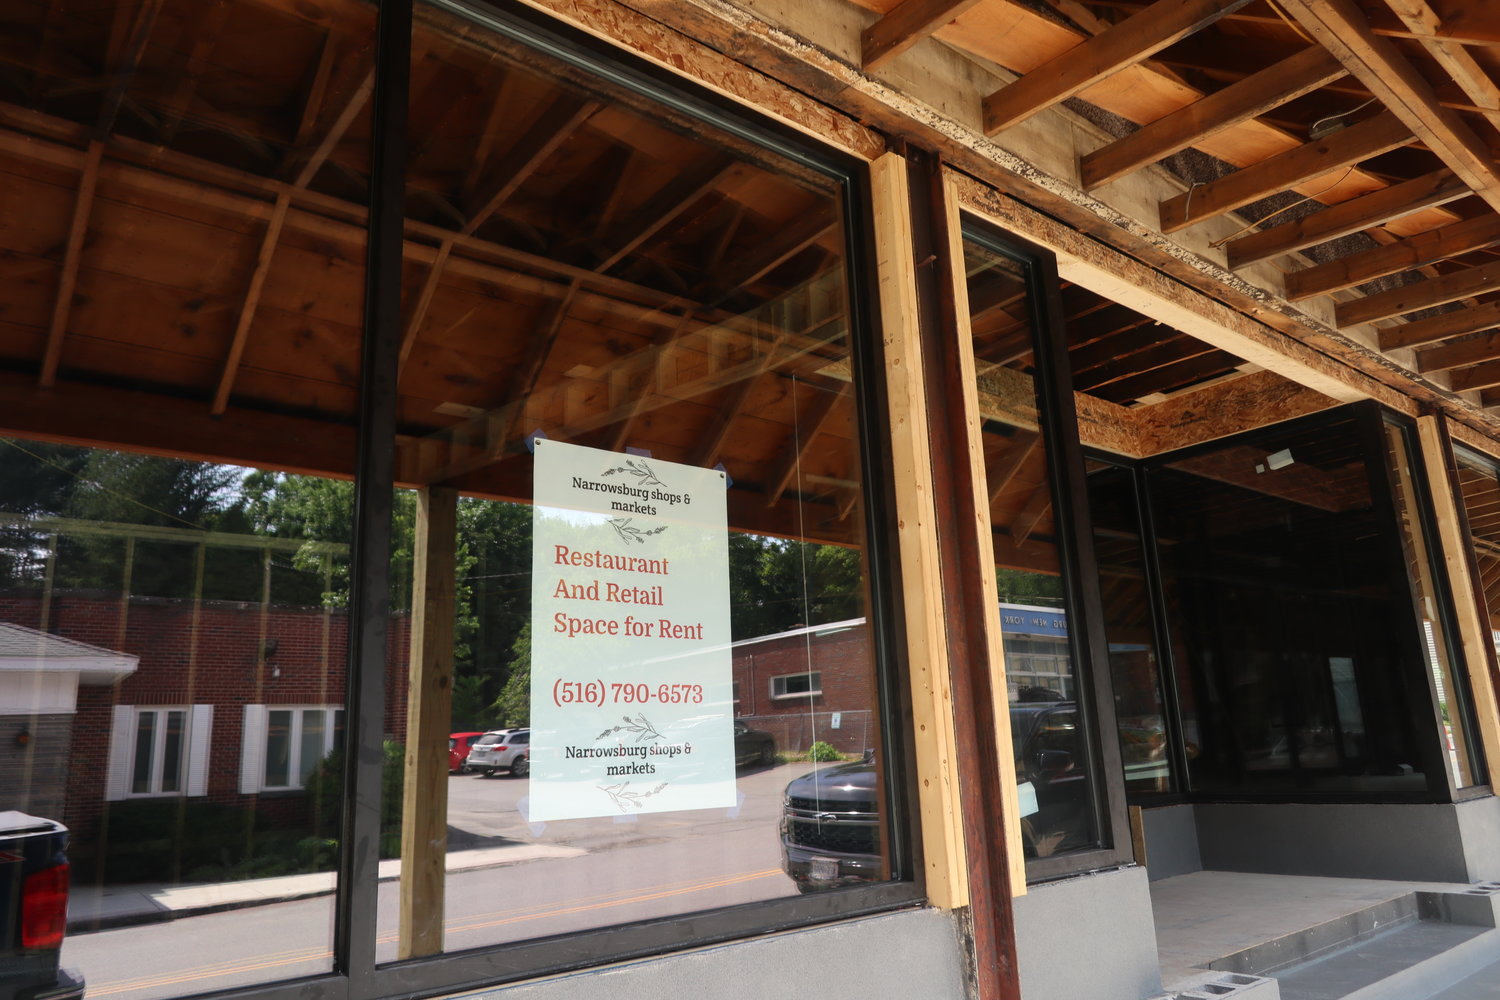 The Narrowsburg Market & Shops, located in the former Rasmussen & Sons Furniture Store is being renovated into connected retail spaces. Developer Nick Santana is hoping that there will be a restaurant and other food and beverage opportunities in the newly renovated space.